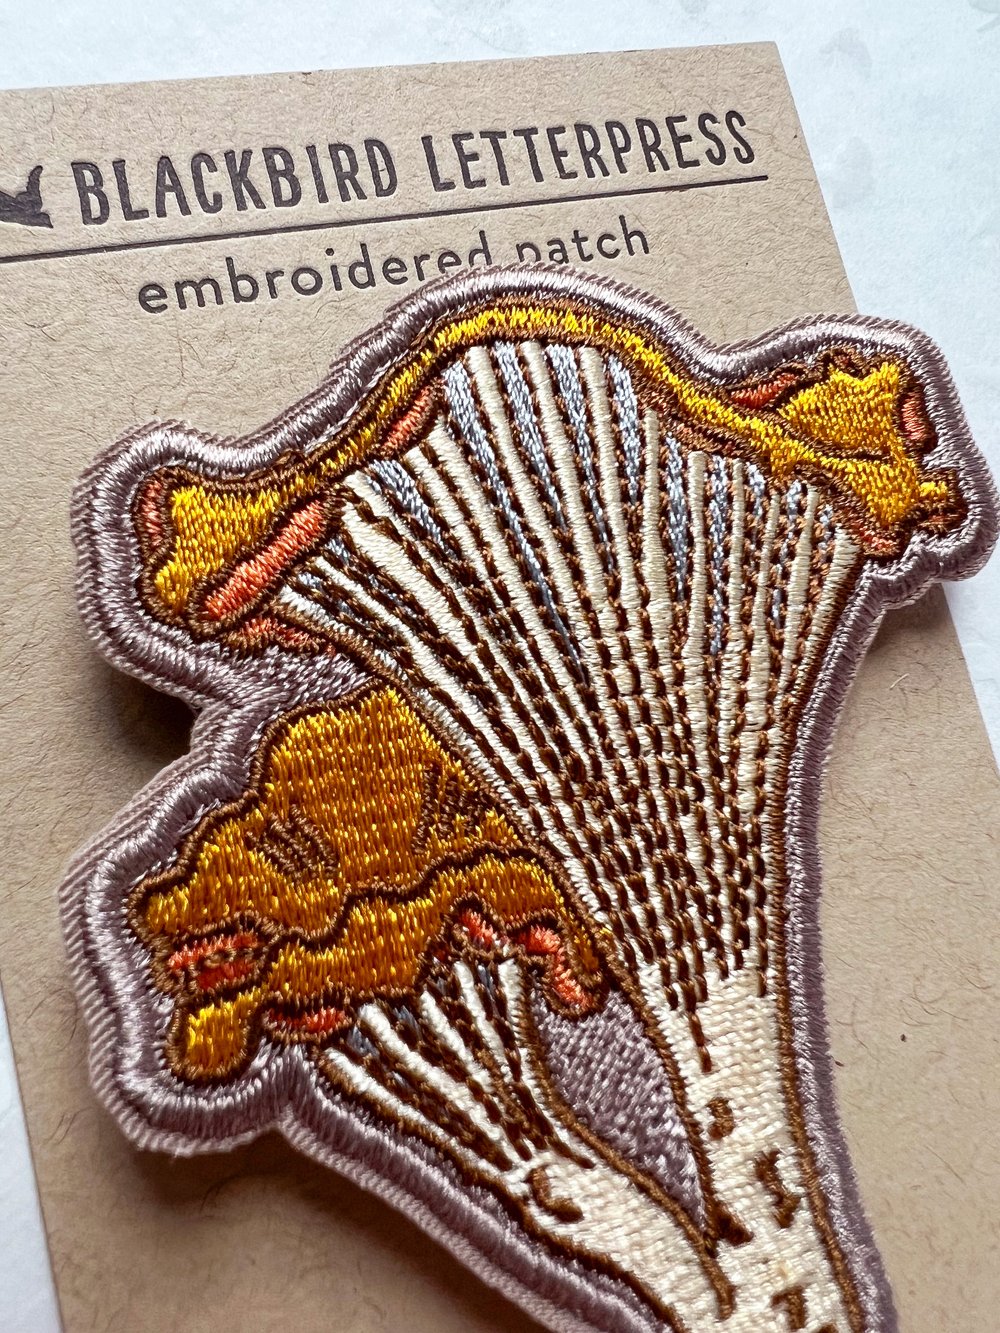 Chanterelle mushroom embroidered patch by Blackbird Letterpress — Blackbird  Letterpress